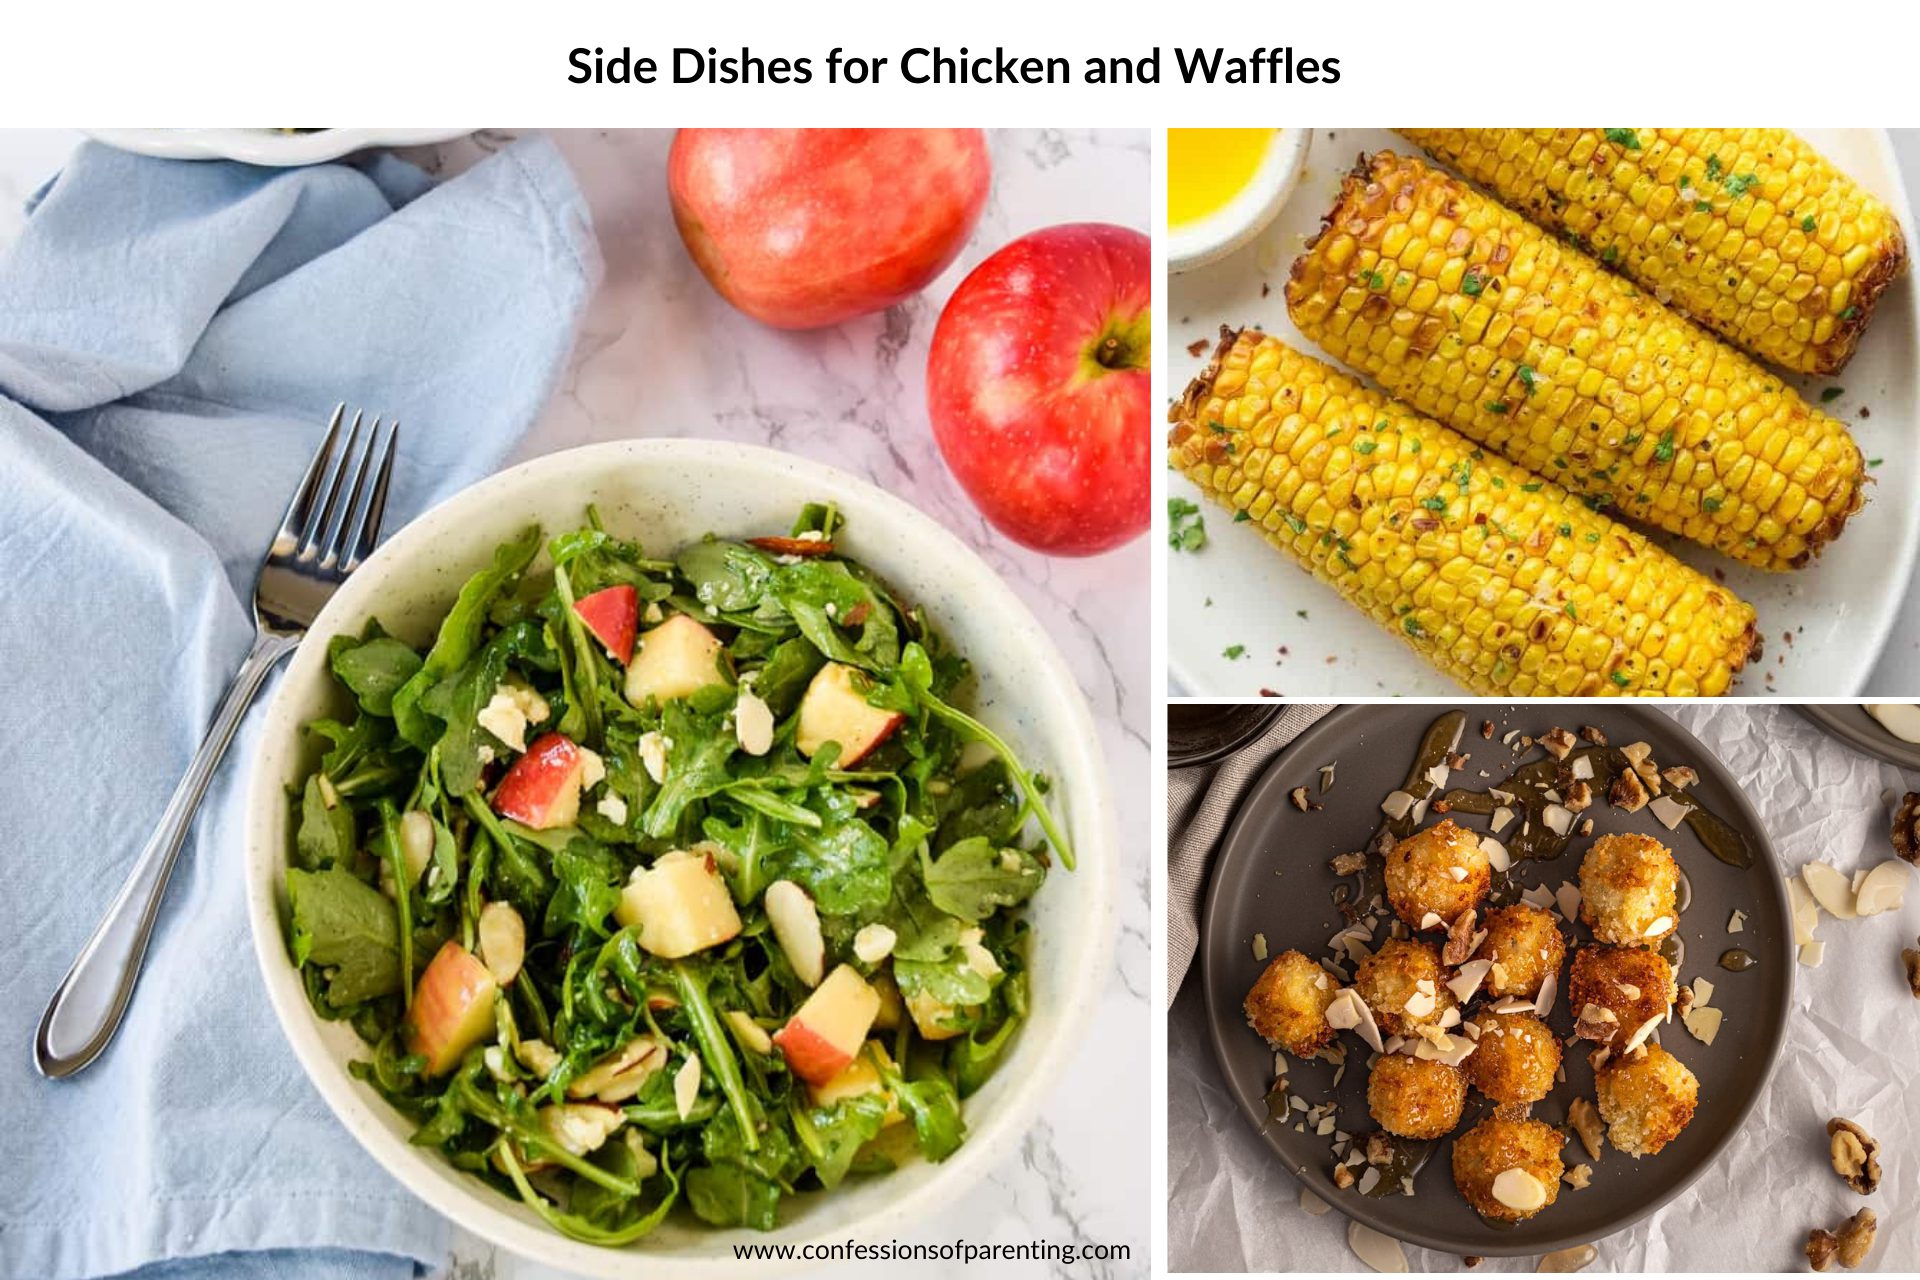 Side Dishes for Chicken and Waffles